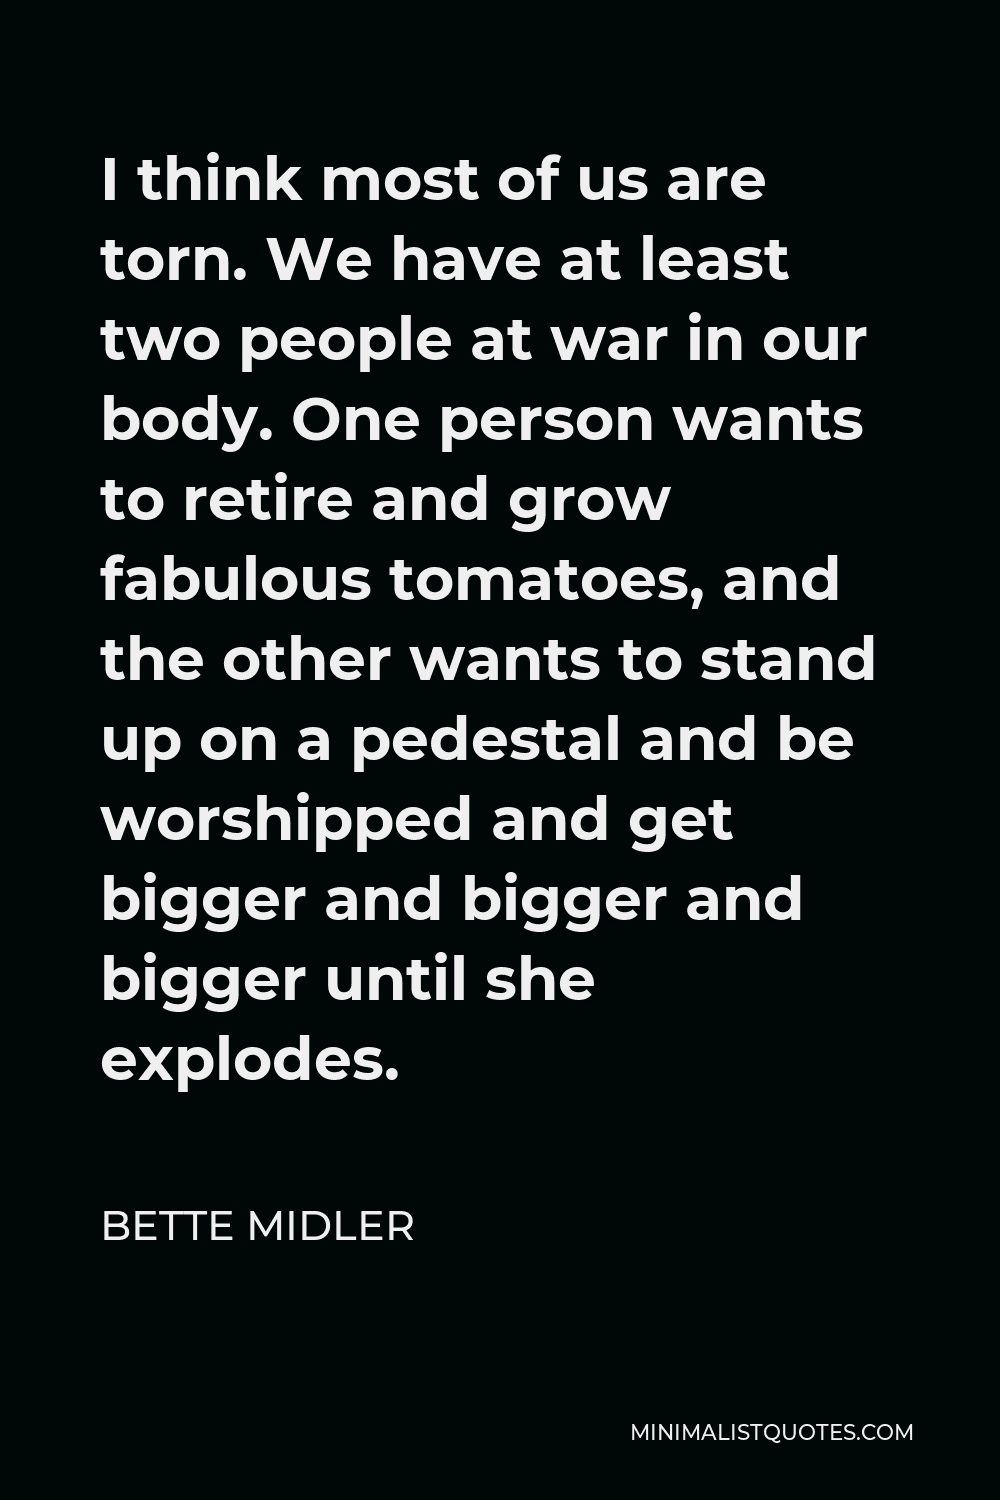 Bette Midler Quote - I think most of us are torn. We have at least two people at war in our body. One person wants to retire and grow fabulous tomatoes, and the other wants to stand up on a pedestal and be worshipped and get bigger and bigger and bigger until she explodes.